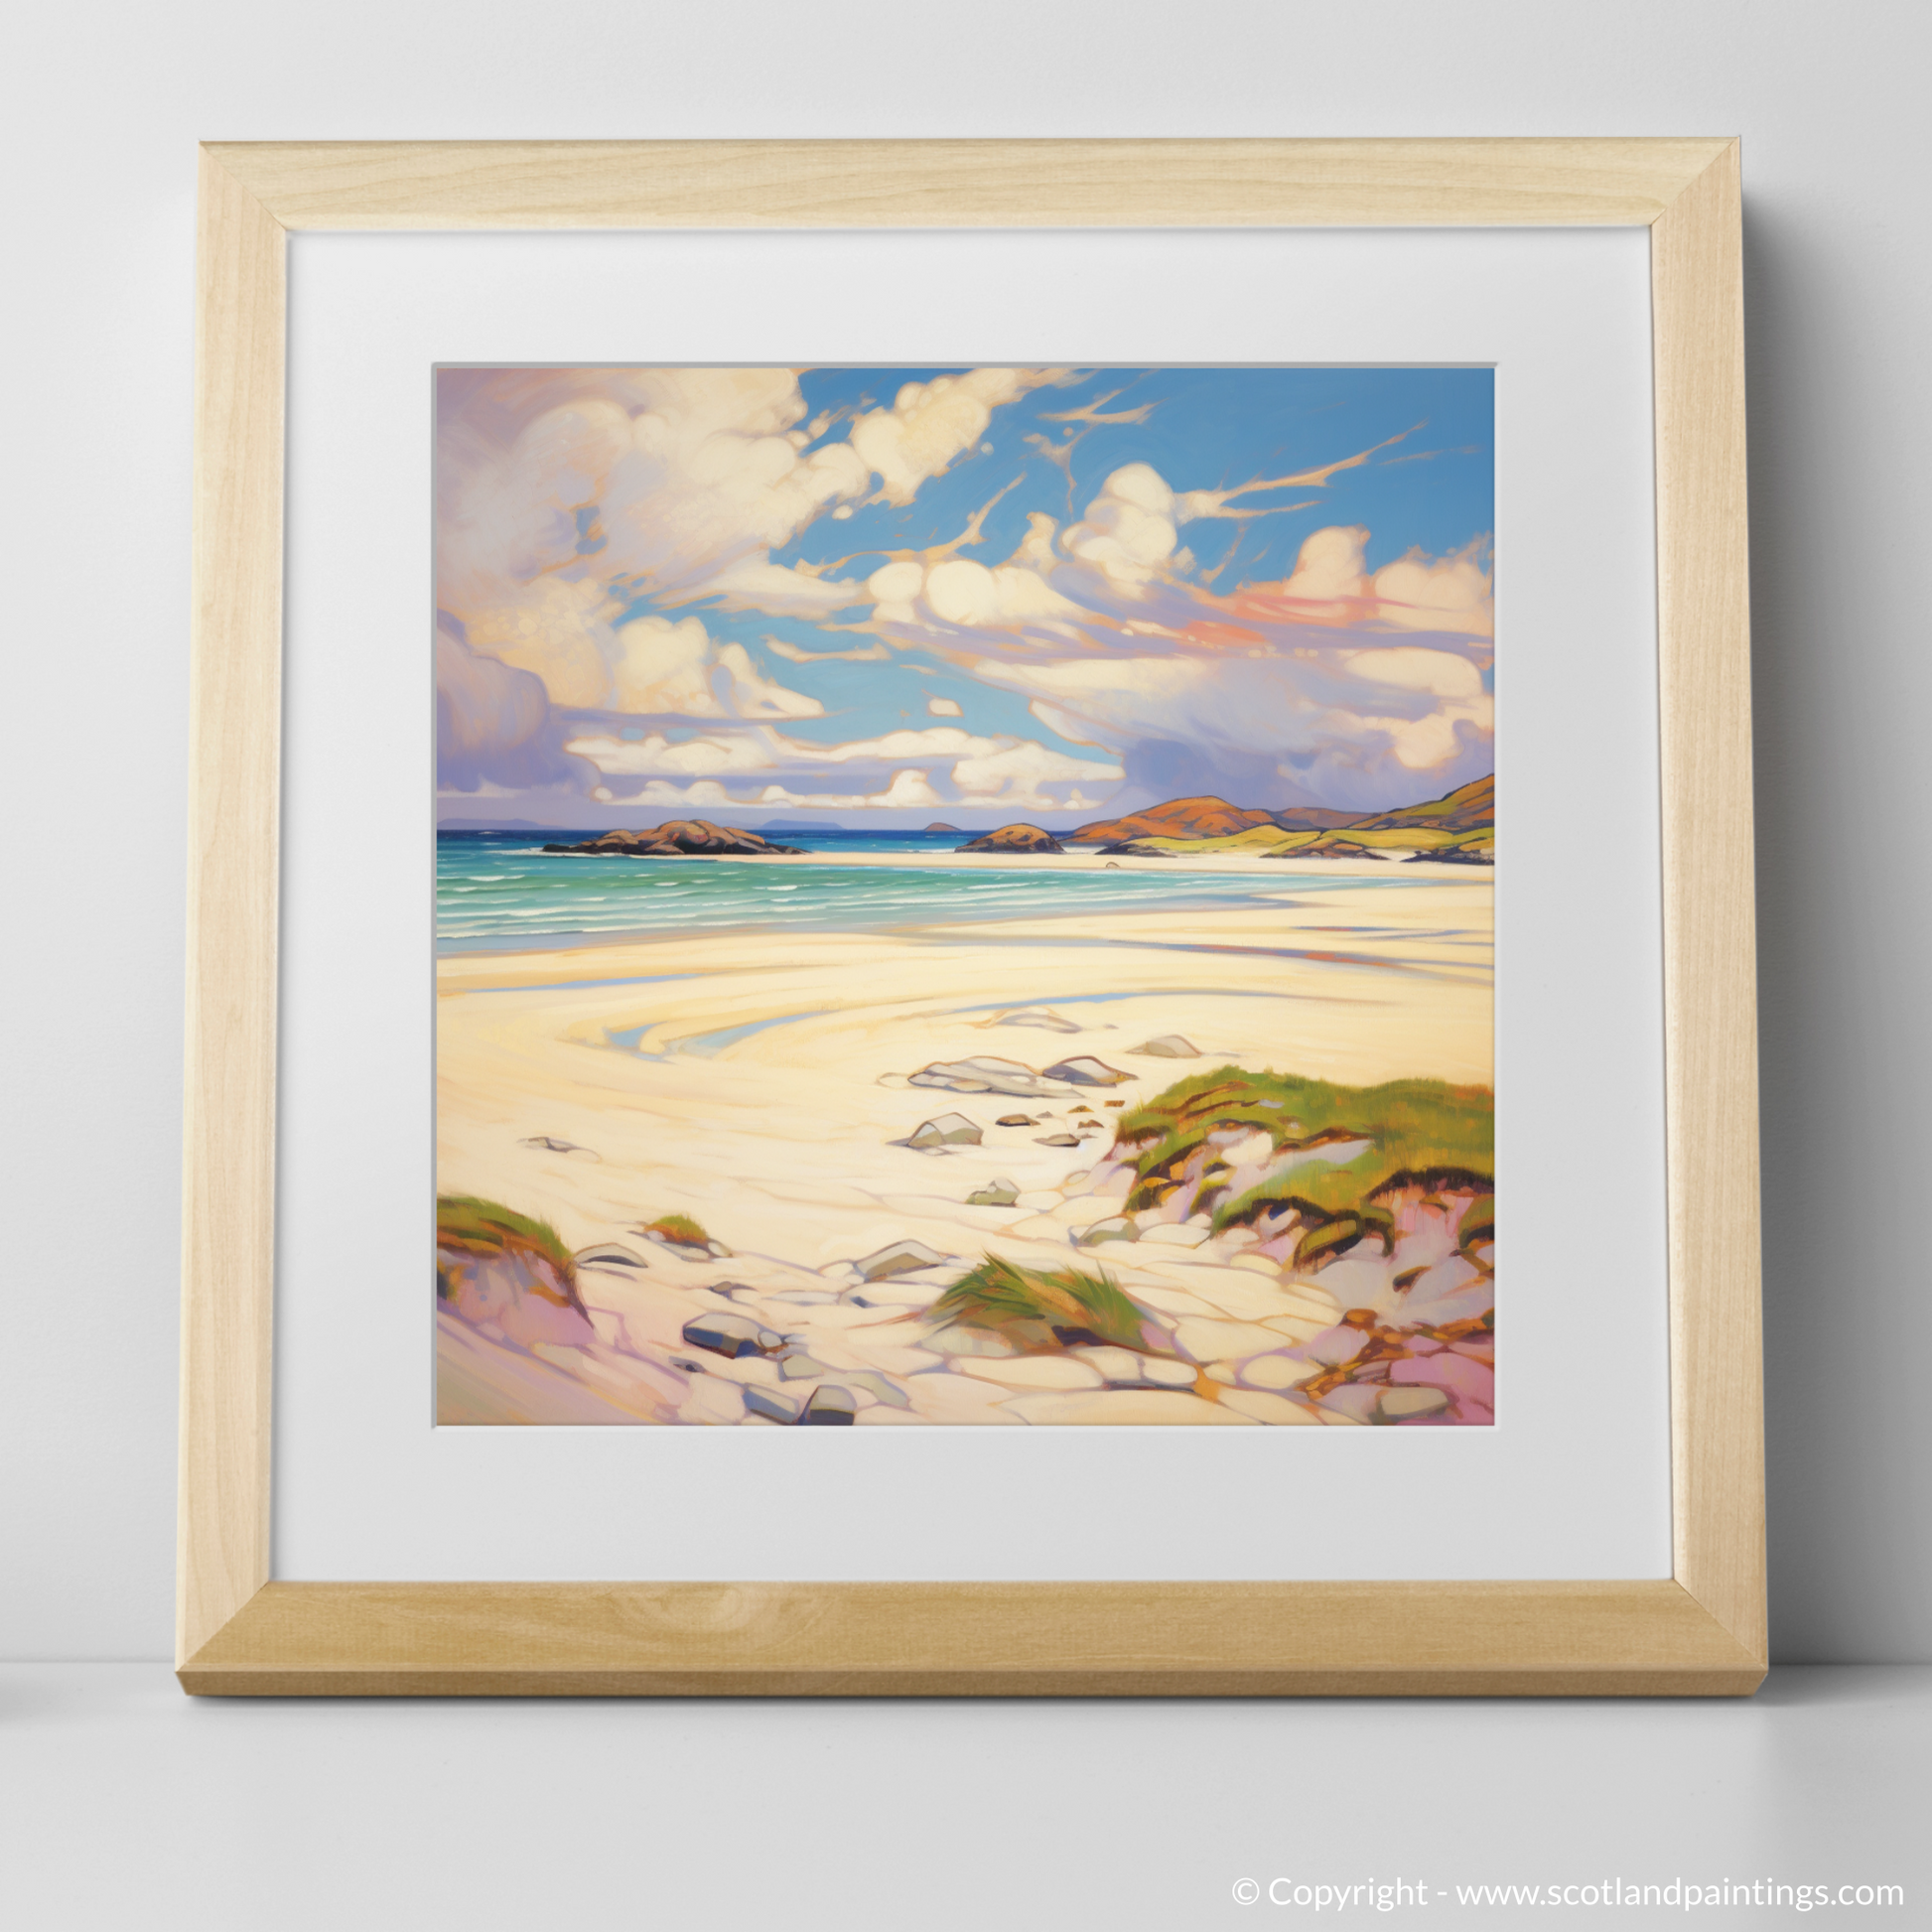 Art Print of Luskentyre Sands, Isle of Lewis in summer with a natural frame